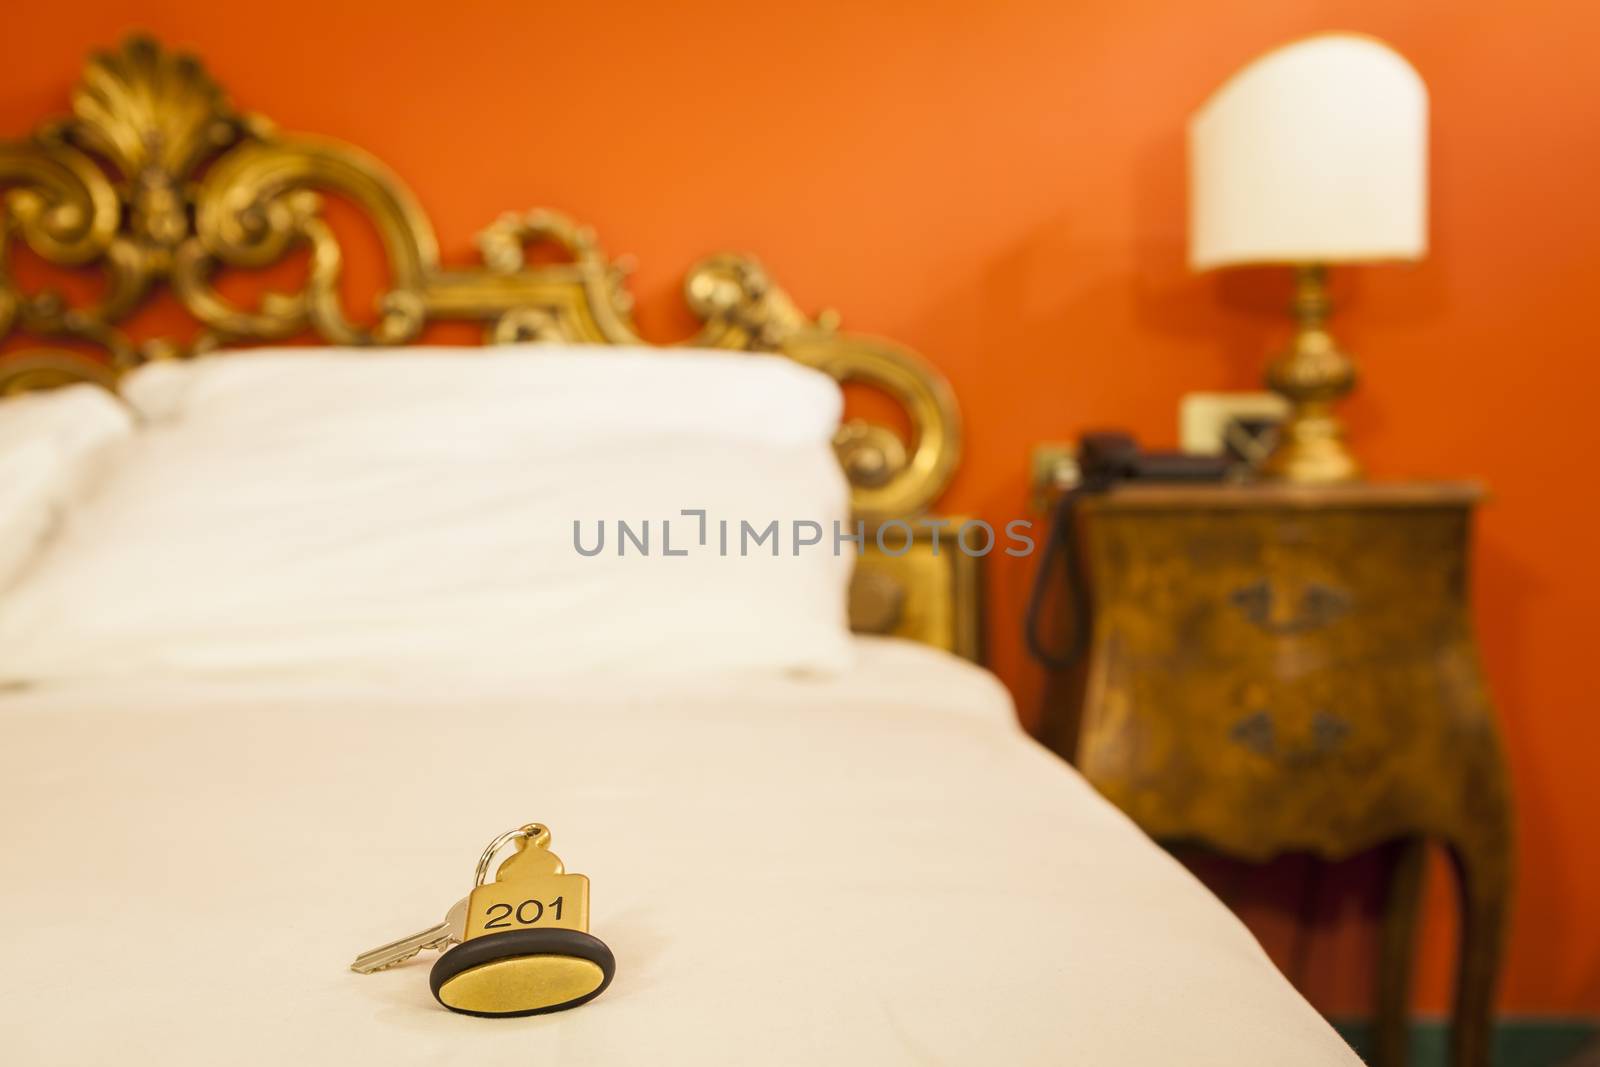 Hotel Room Key lying on Bed with keyring golden